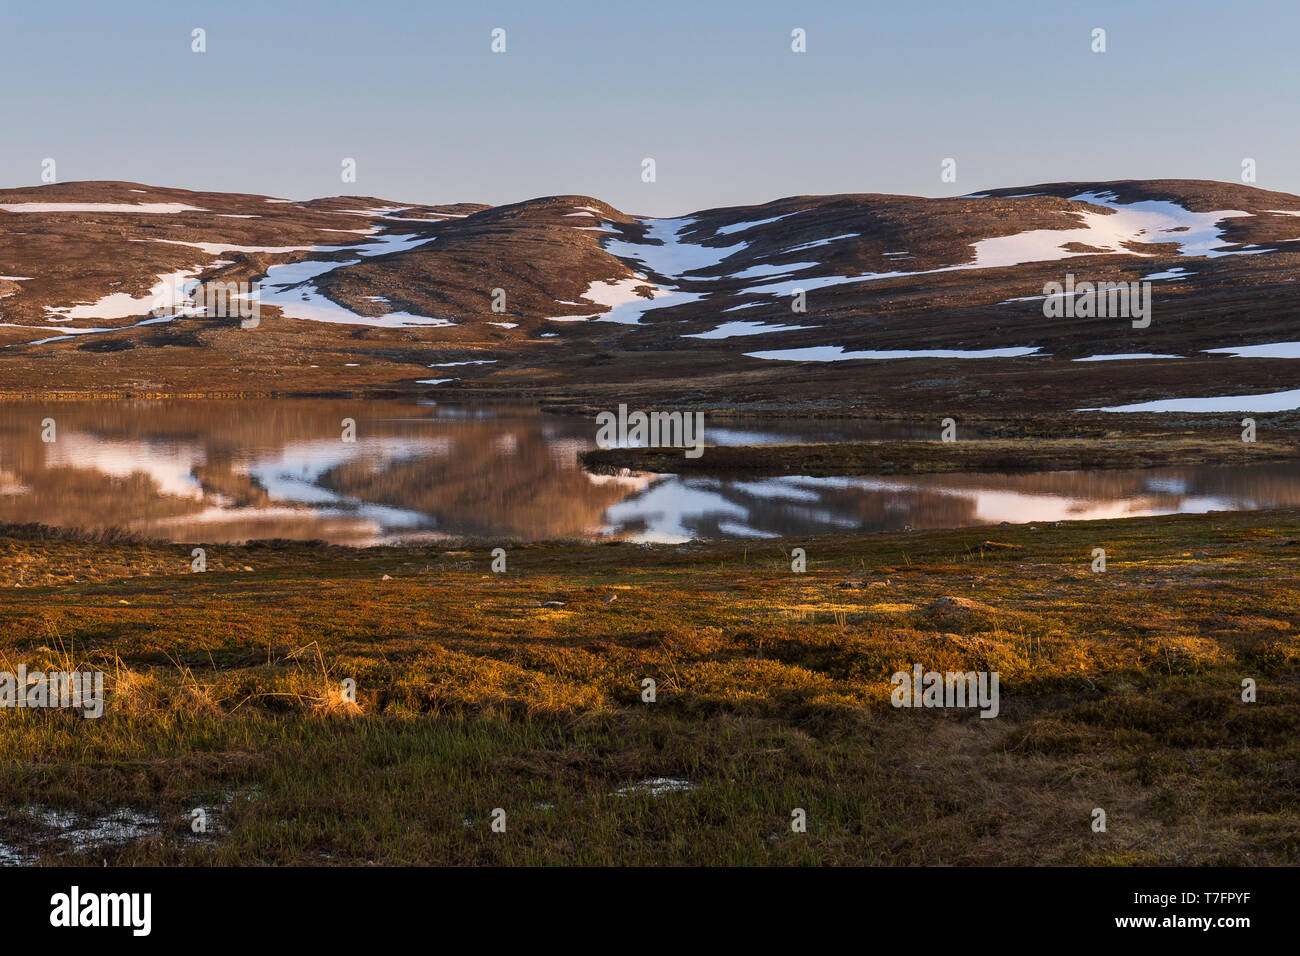 Landscape, tundra landscape with snow patches Stock Photo